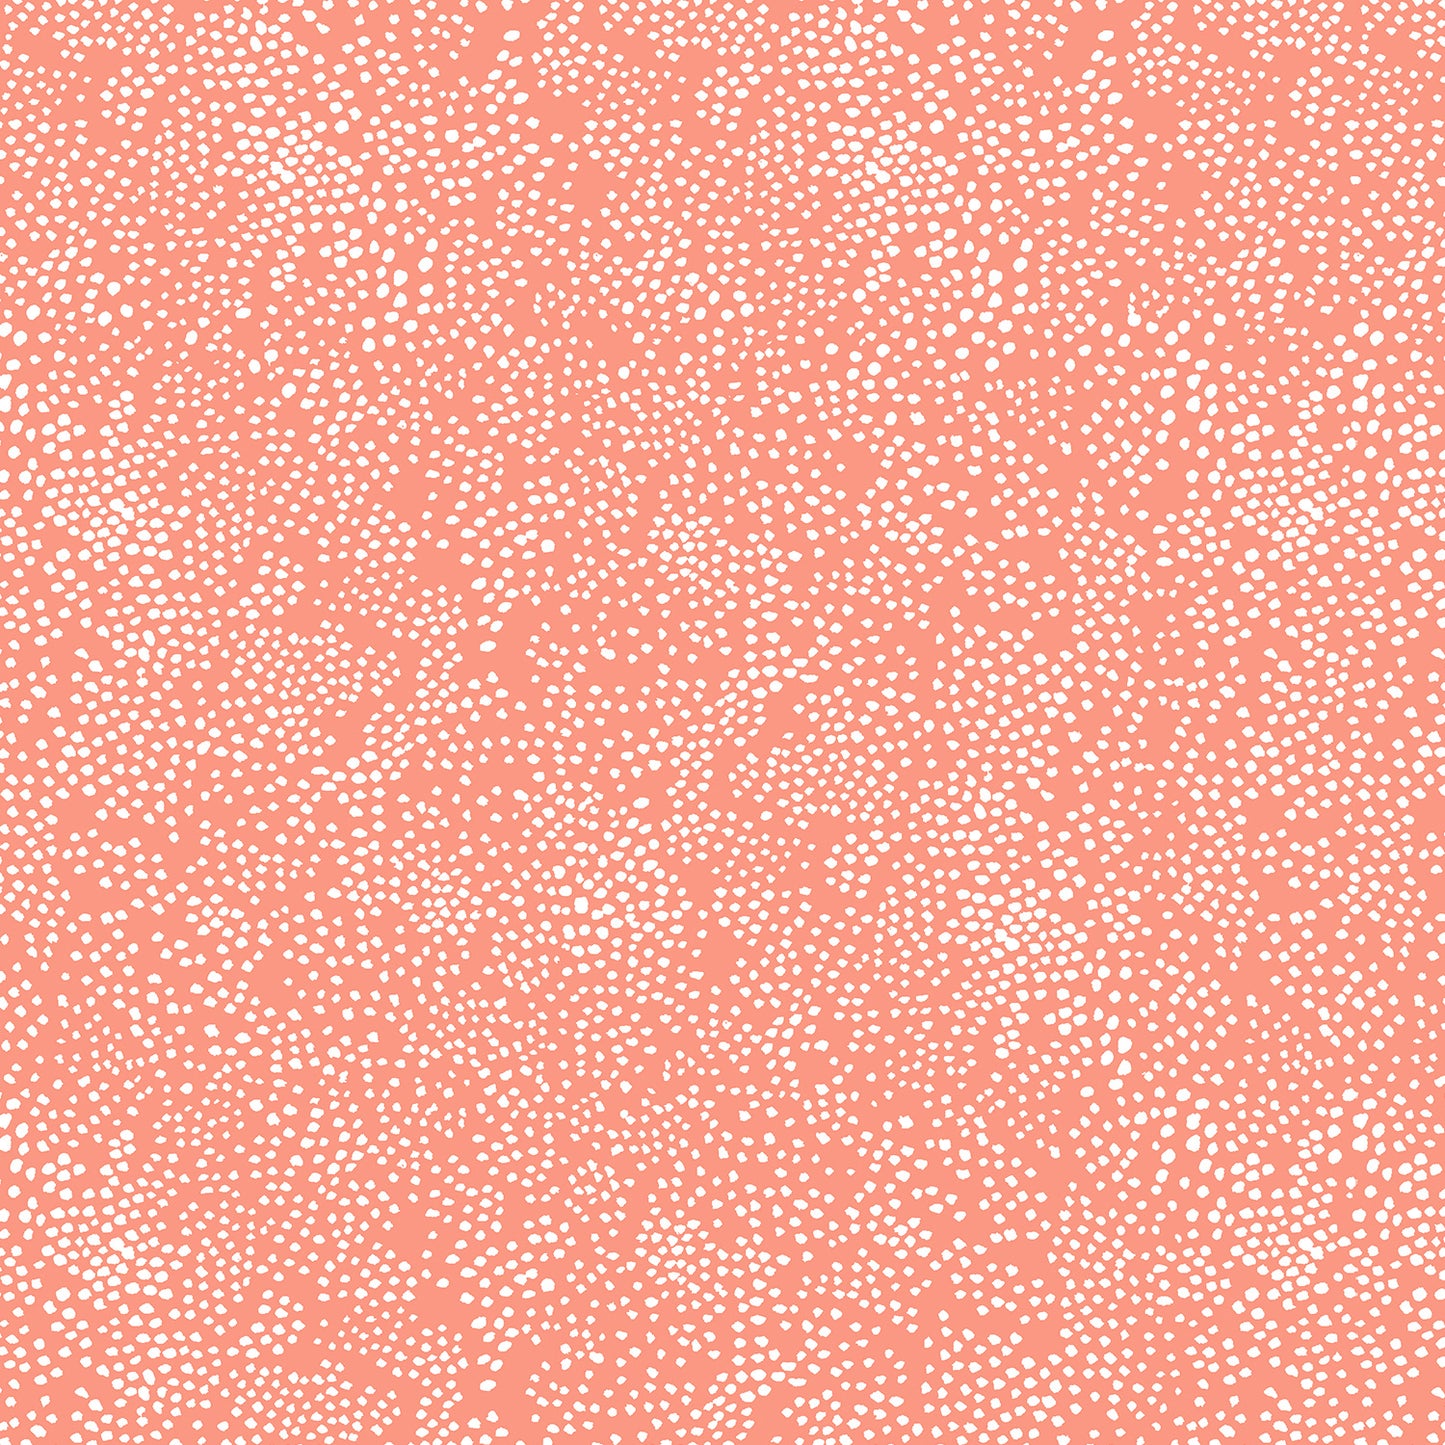 Menagerie Champagne In Coral - Weave & Woven